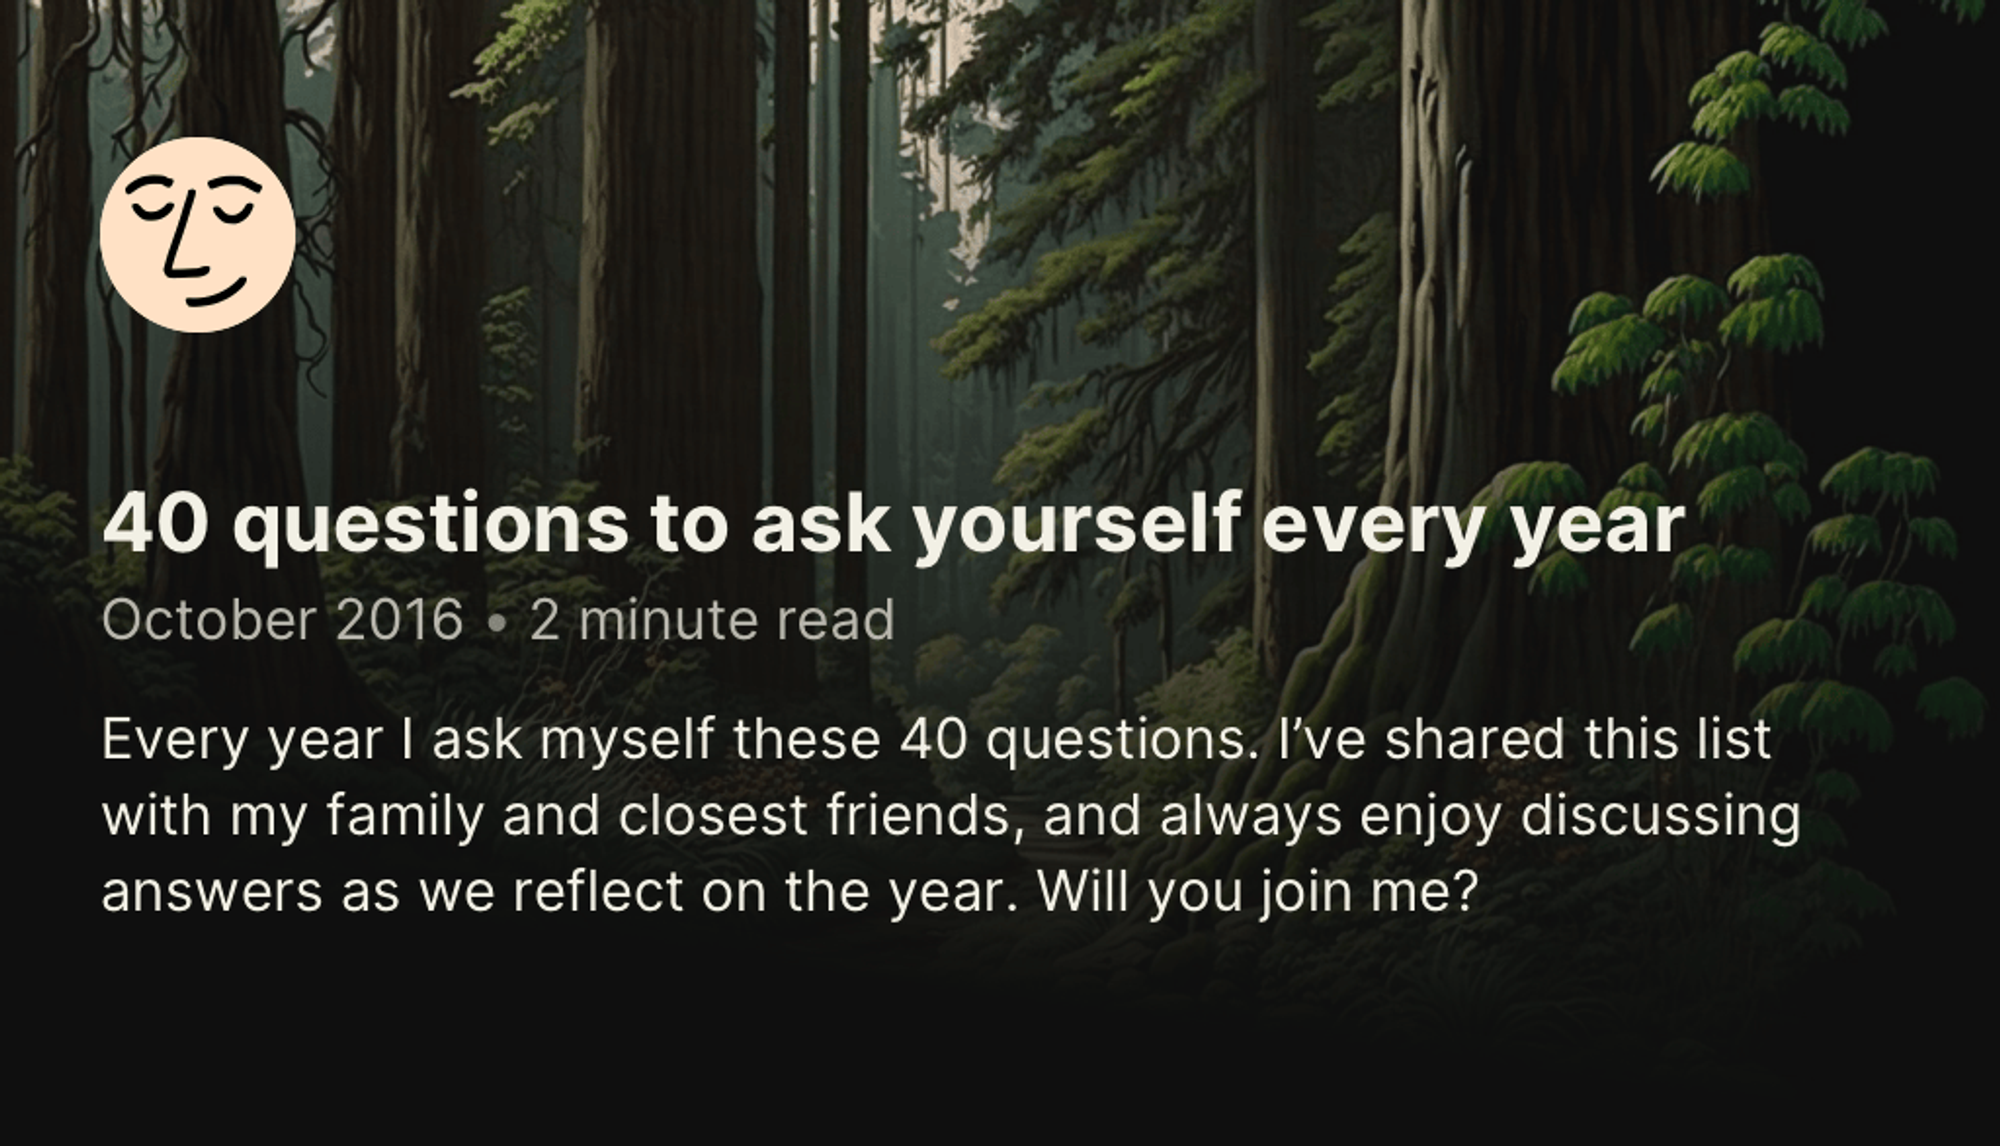 40 questions to ask yourself every year